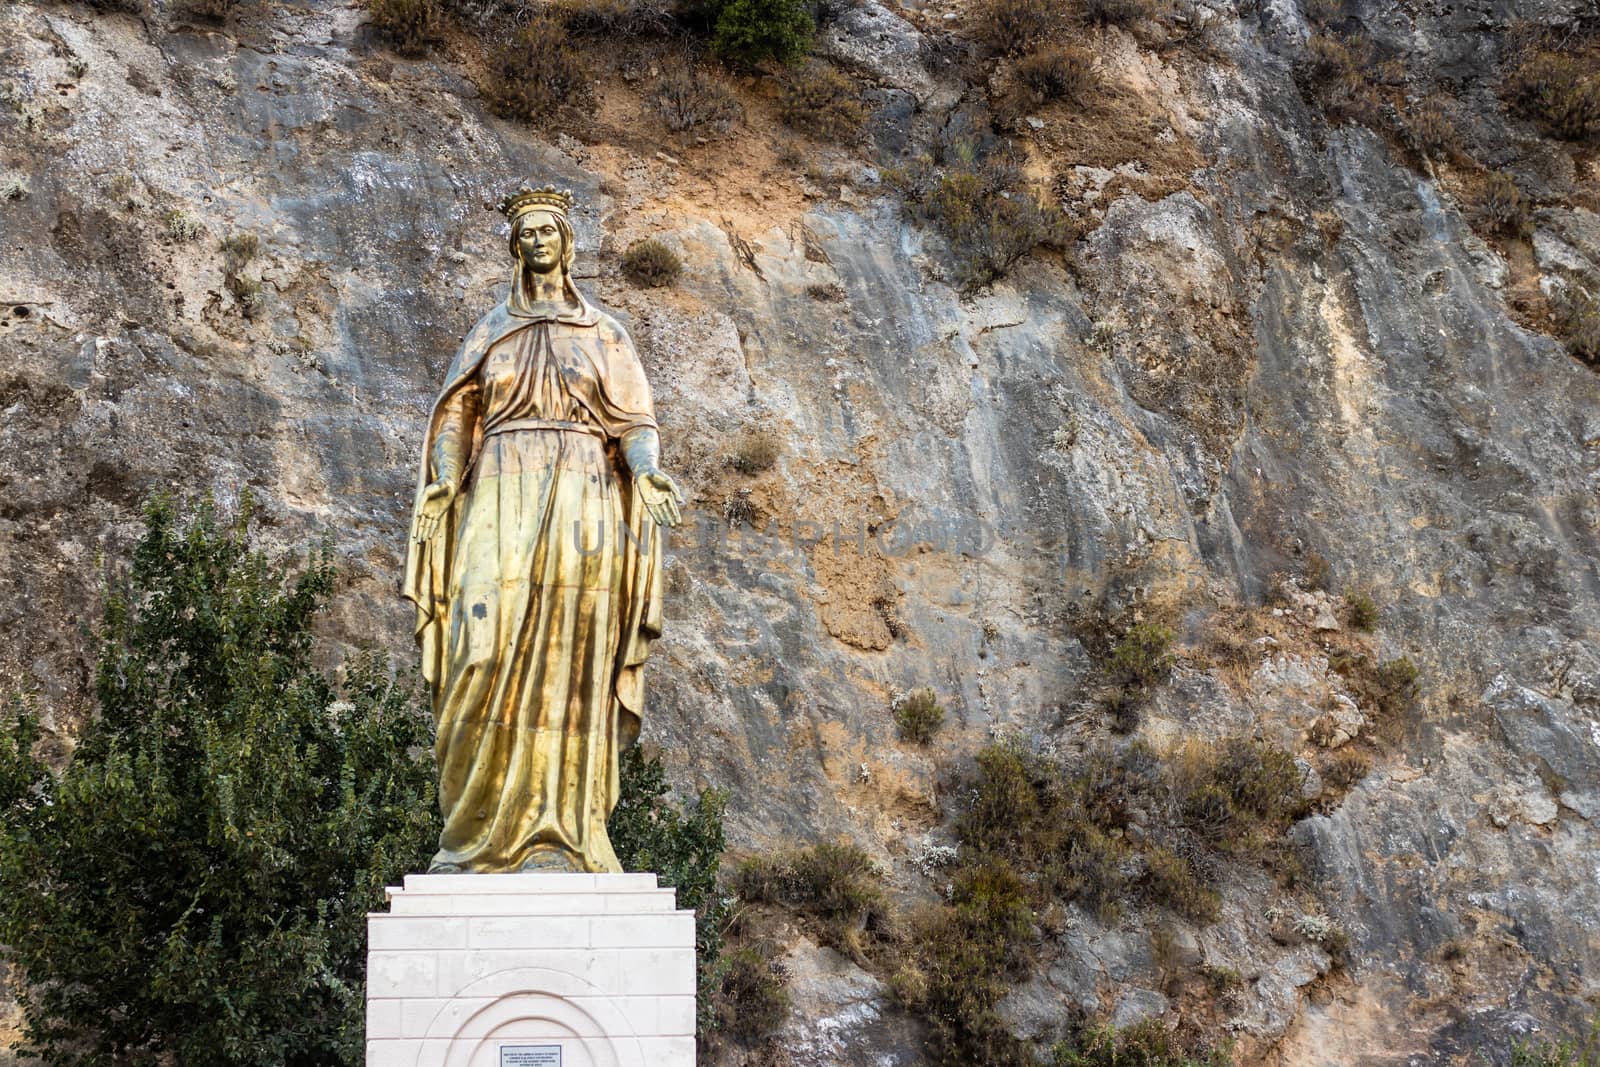 a wide shoot from golden virgin mary statue - detailed and nice looking. photo has taken at izmir/turkey.